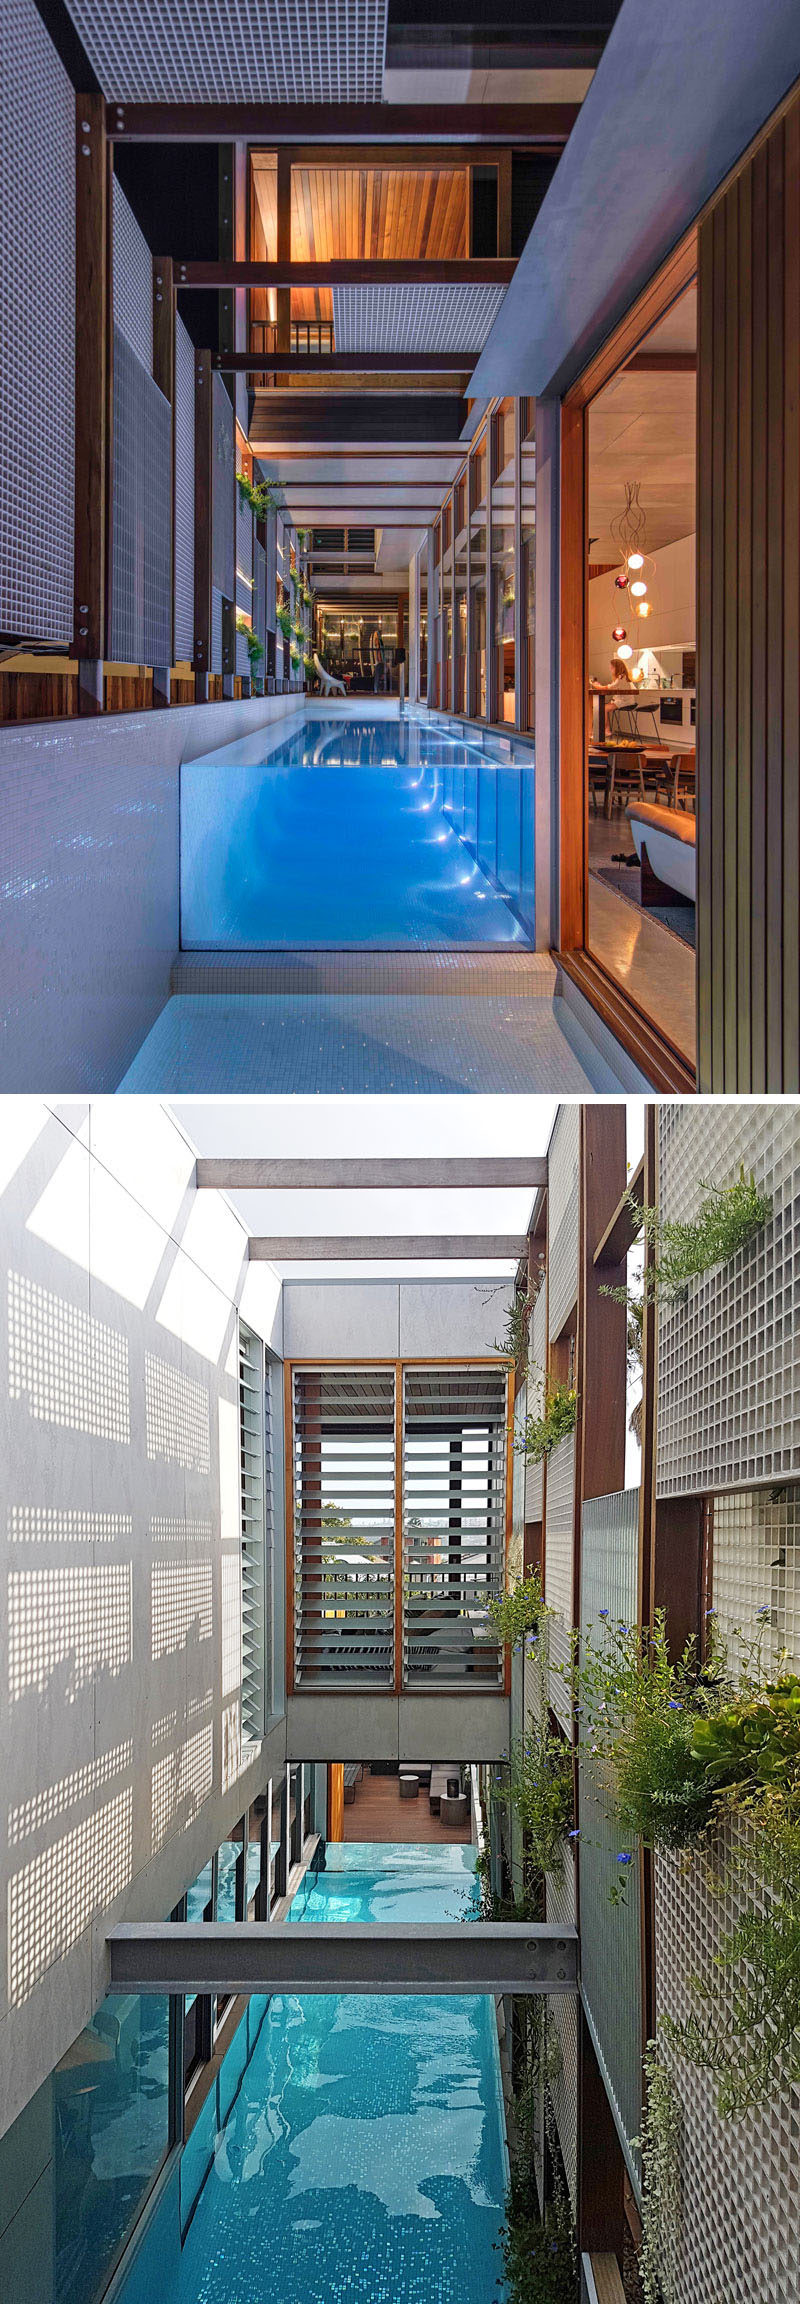 Off to the side of the living room in this modern house, is a small pond at the end of the above ground swimming pool. In these photos you can see how the space above the pool is partially open to the sky and allows sunlight to filter through.